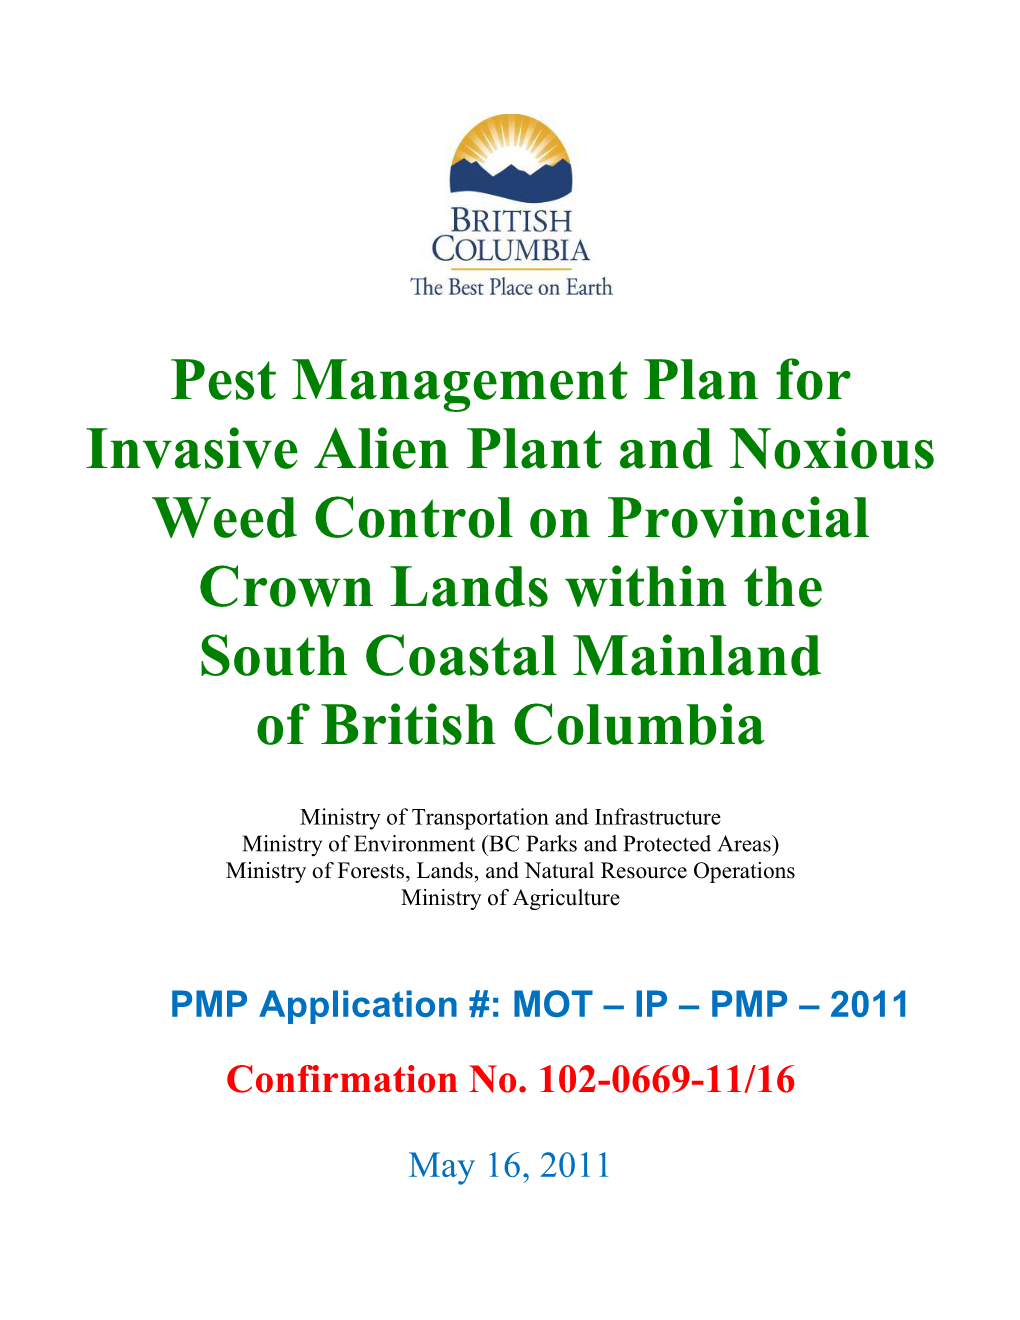 Pest Management Plan for Invasive Alien Plant and Noxious Weed Control on Provincial Crown Lands Within the South Coastal Mainland of British Columbia